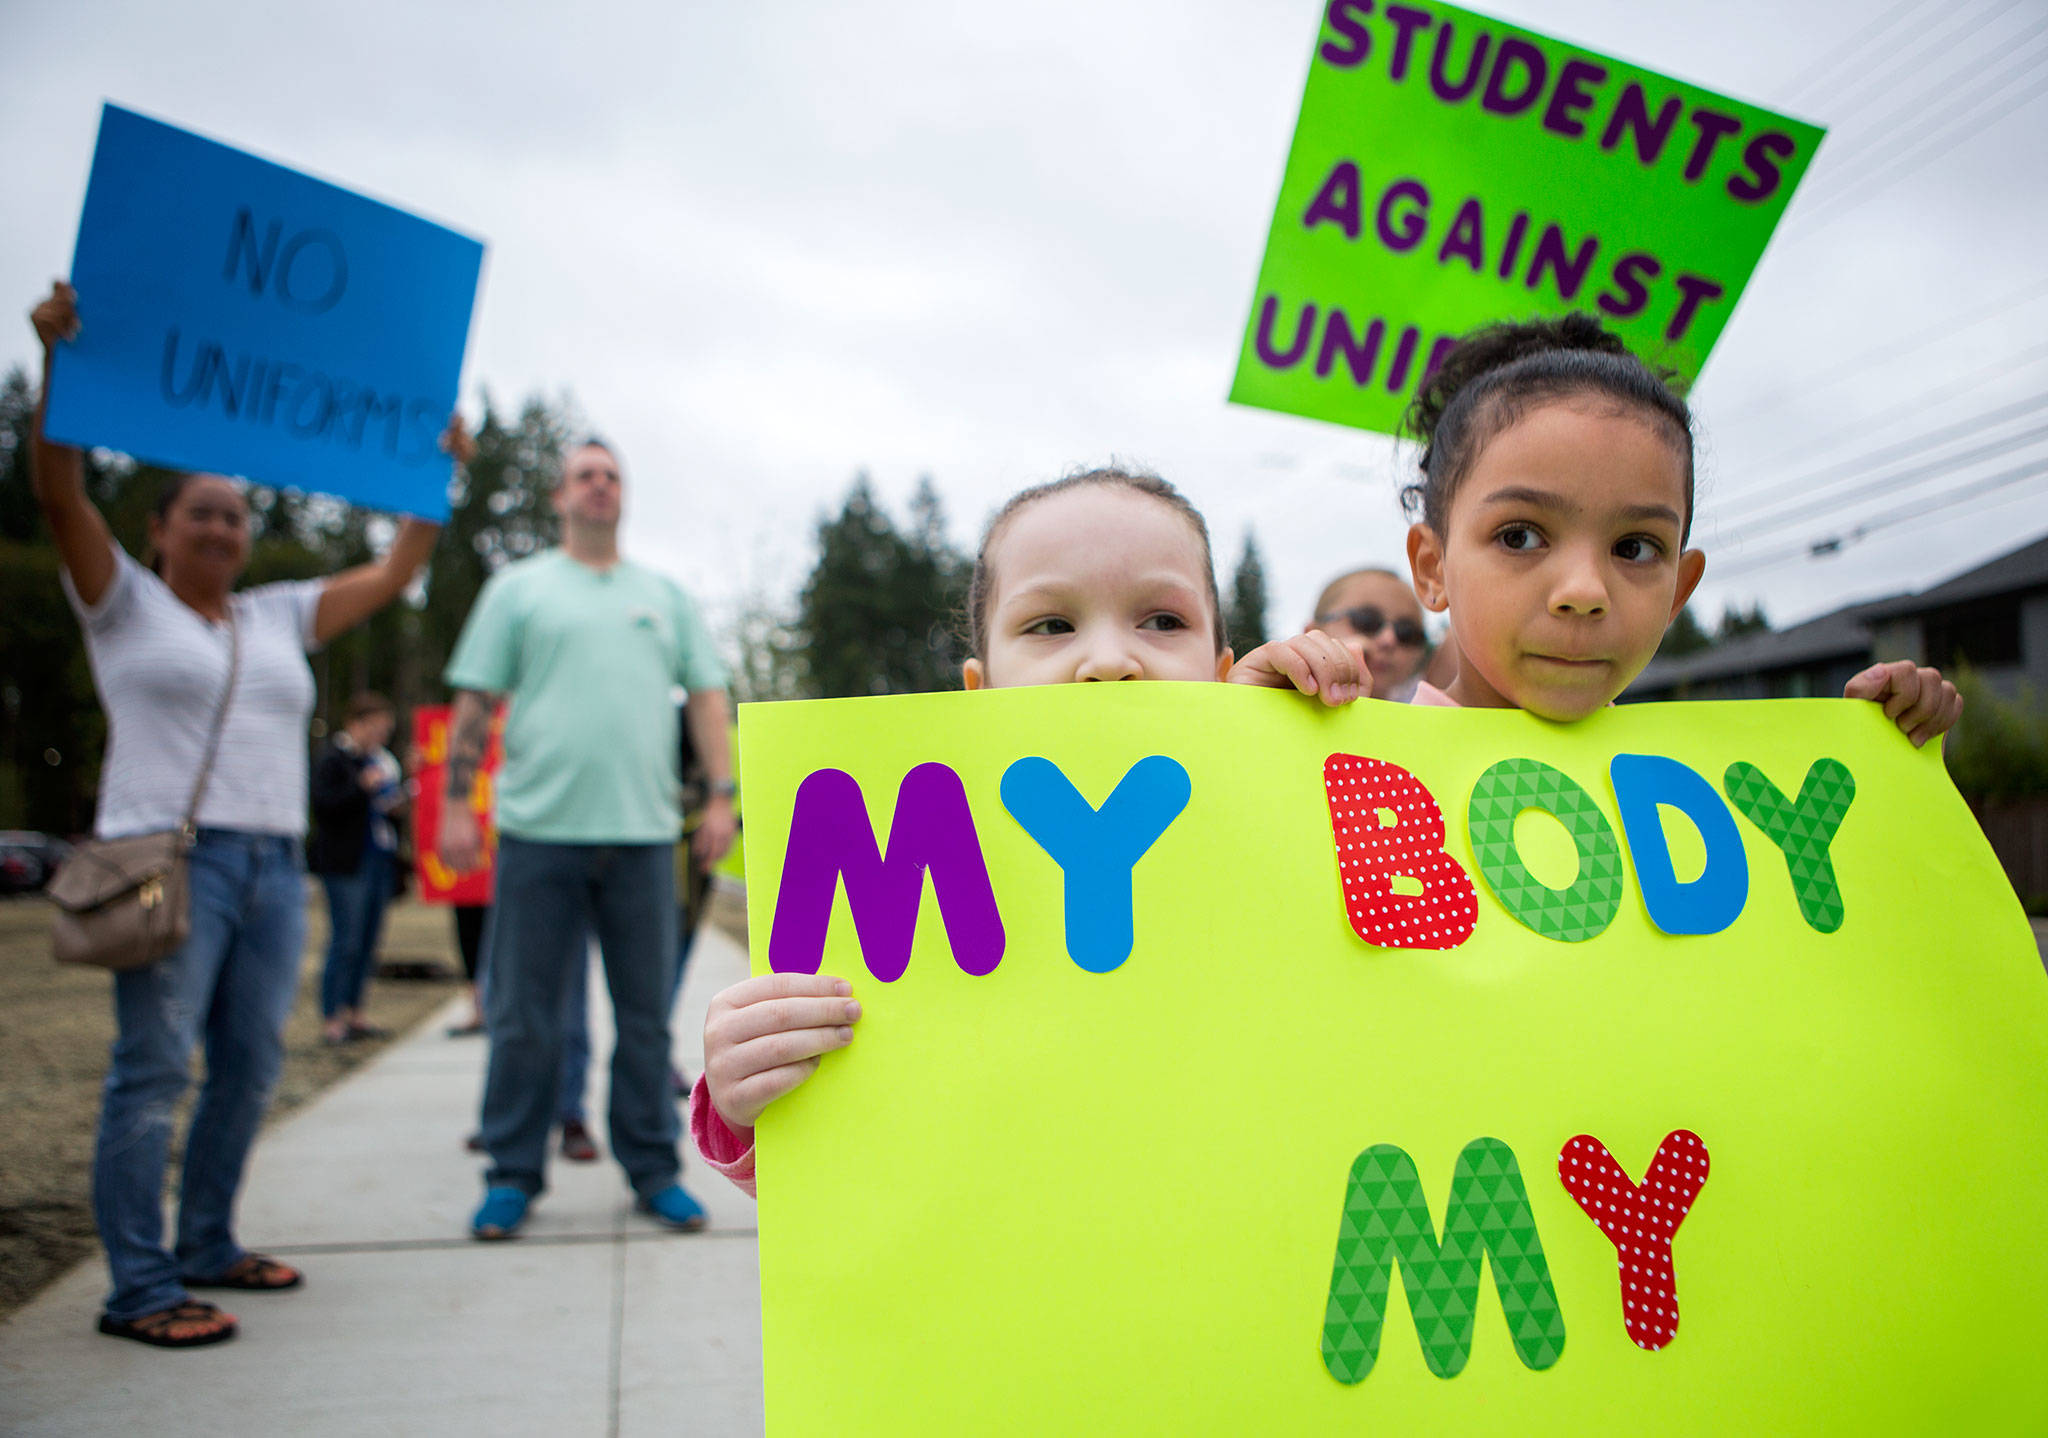 Chloe Savas, 6, right, and sister Kaylee Savas, 3, stand in front of the new Tambark Creek Elementary School on Wednsday, in protest of the uniform policy. (Olivia Vanni / The Herald)